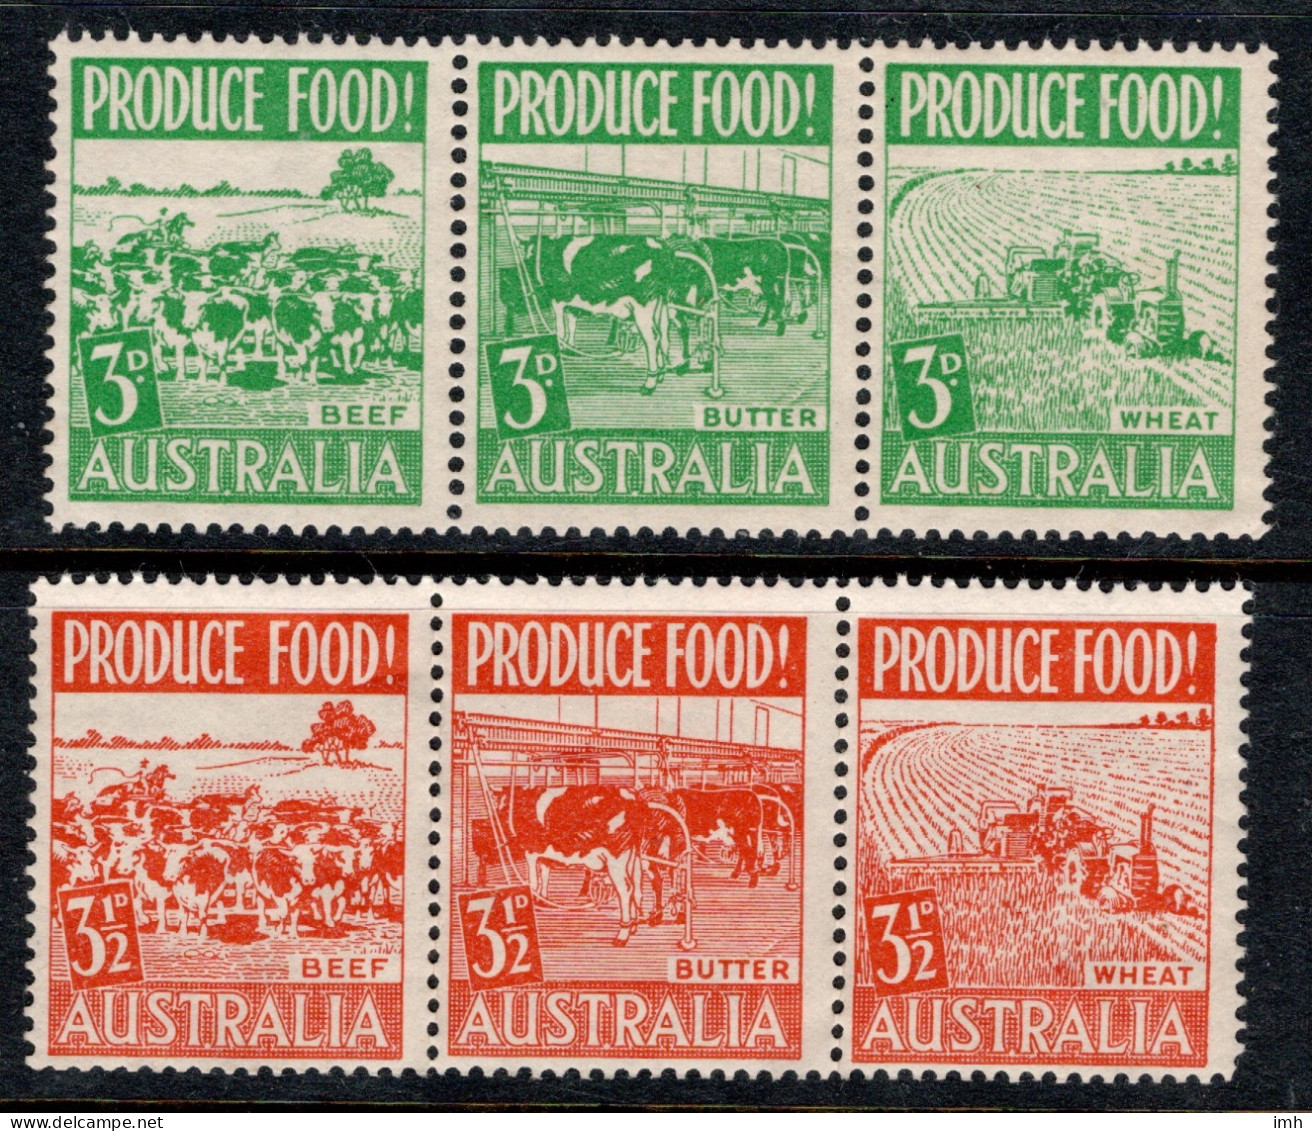 1953 Australia SG 255-260 Produce Food In Strips Of Three Complete Set , Mint Unhinged MUH Cat £3.00 - Nuevos